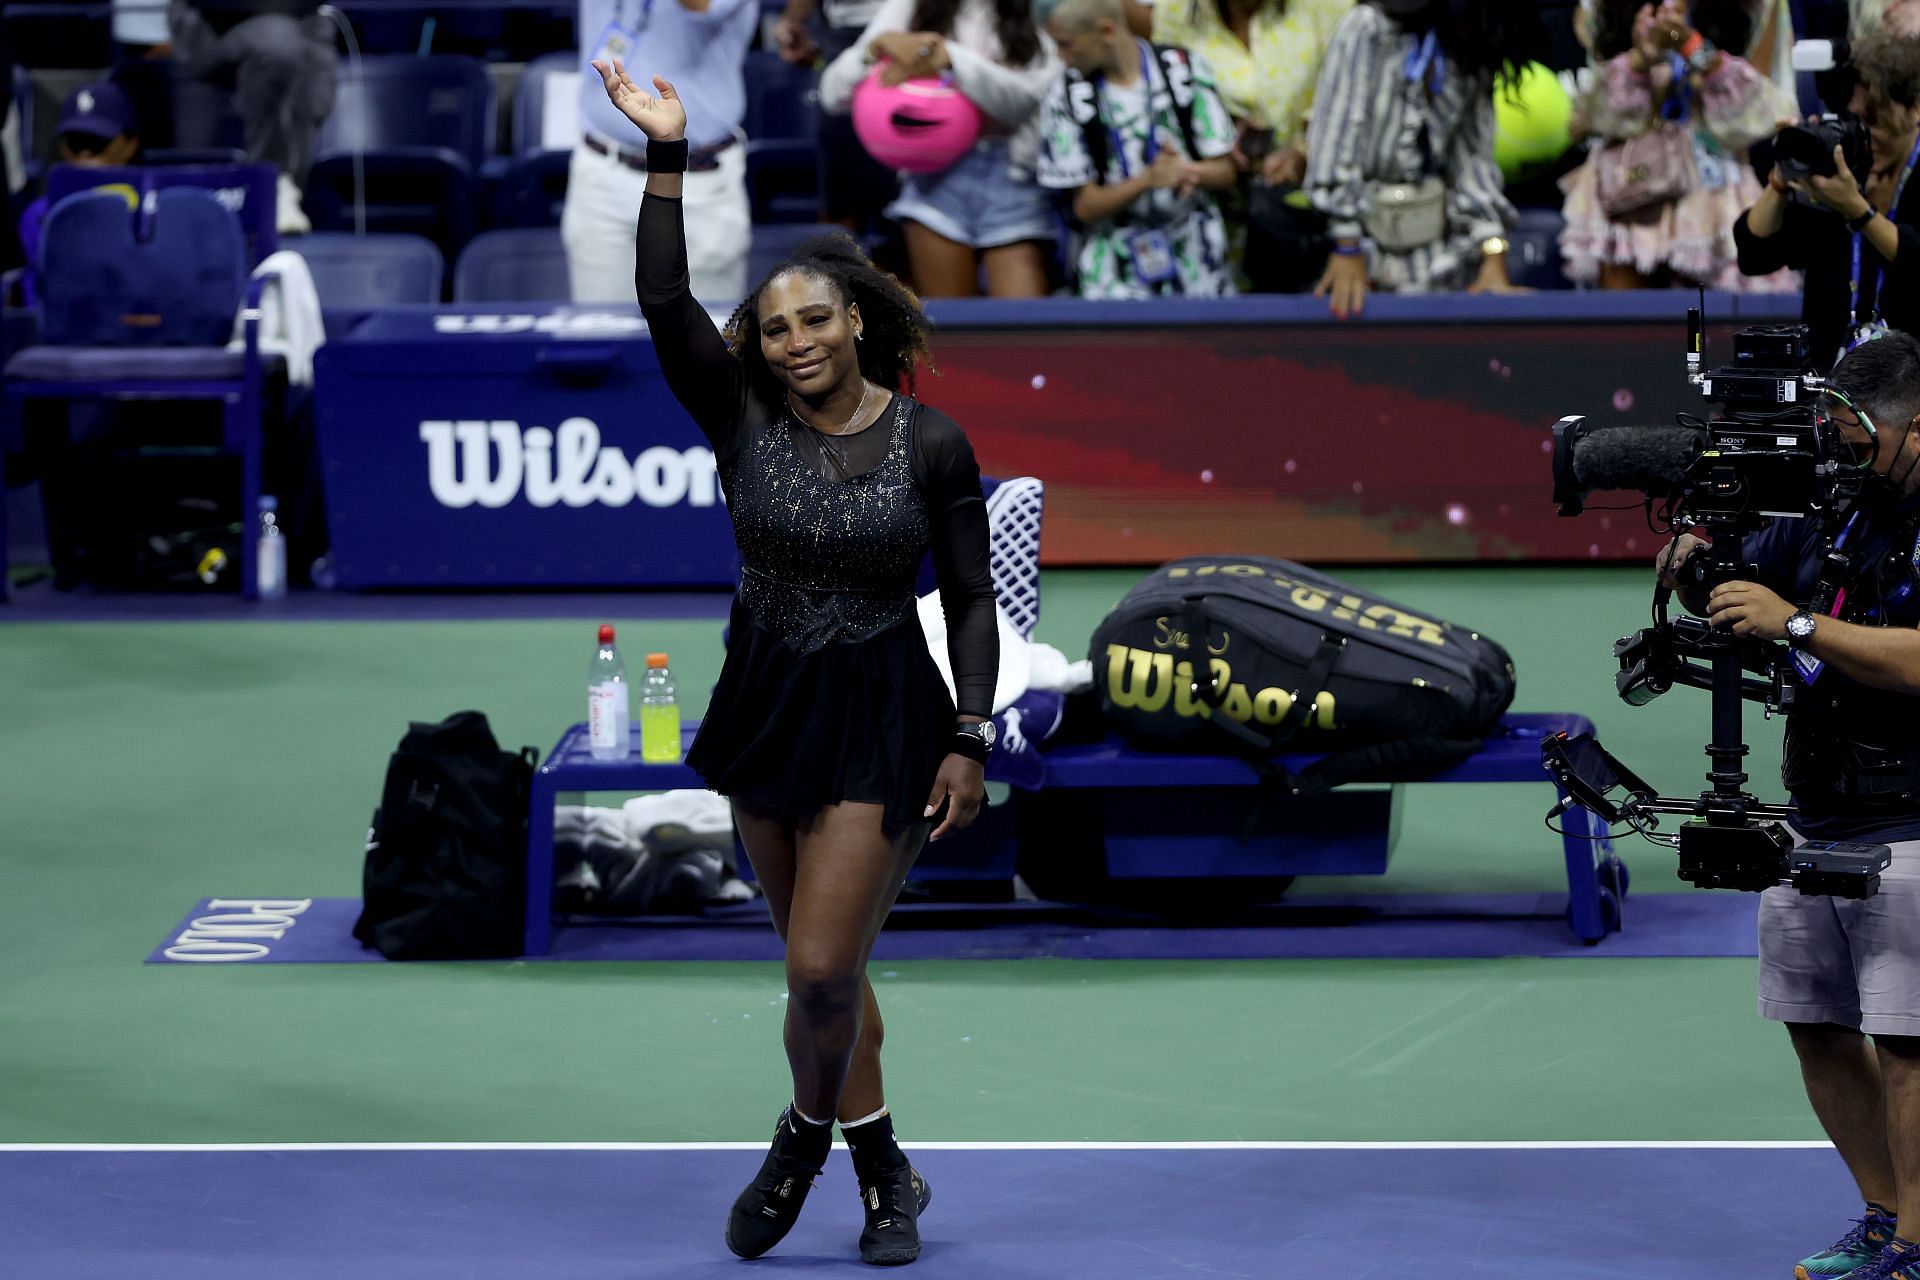 Serena Williams waves to the crowd at the 2022 US Open